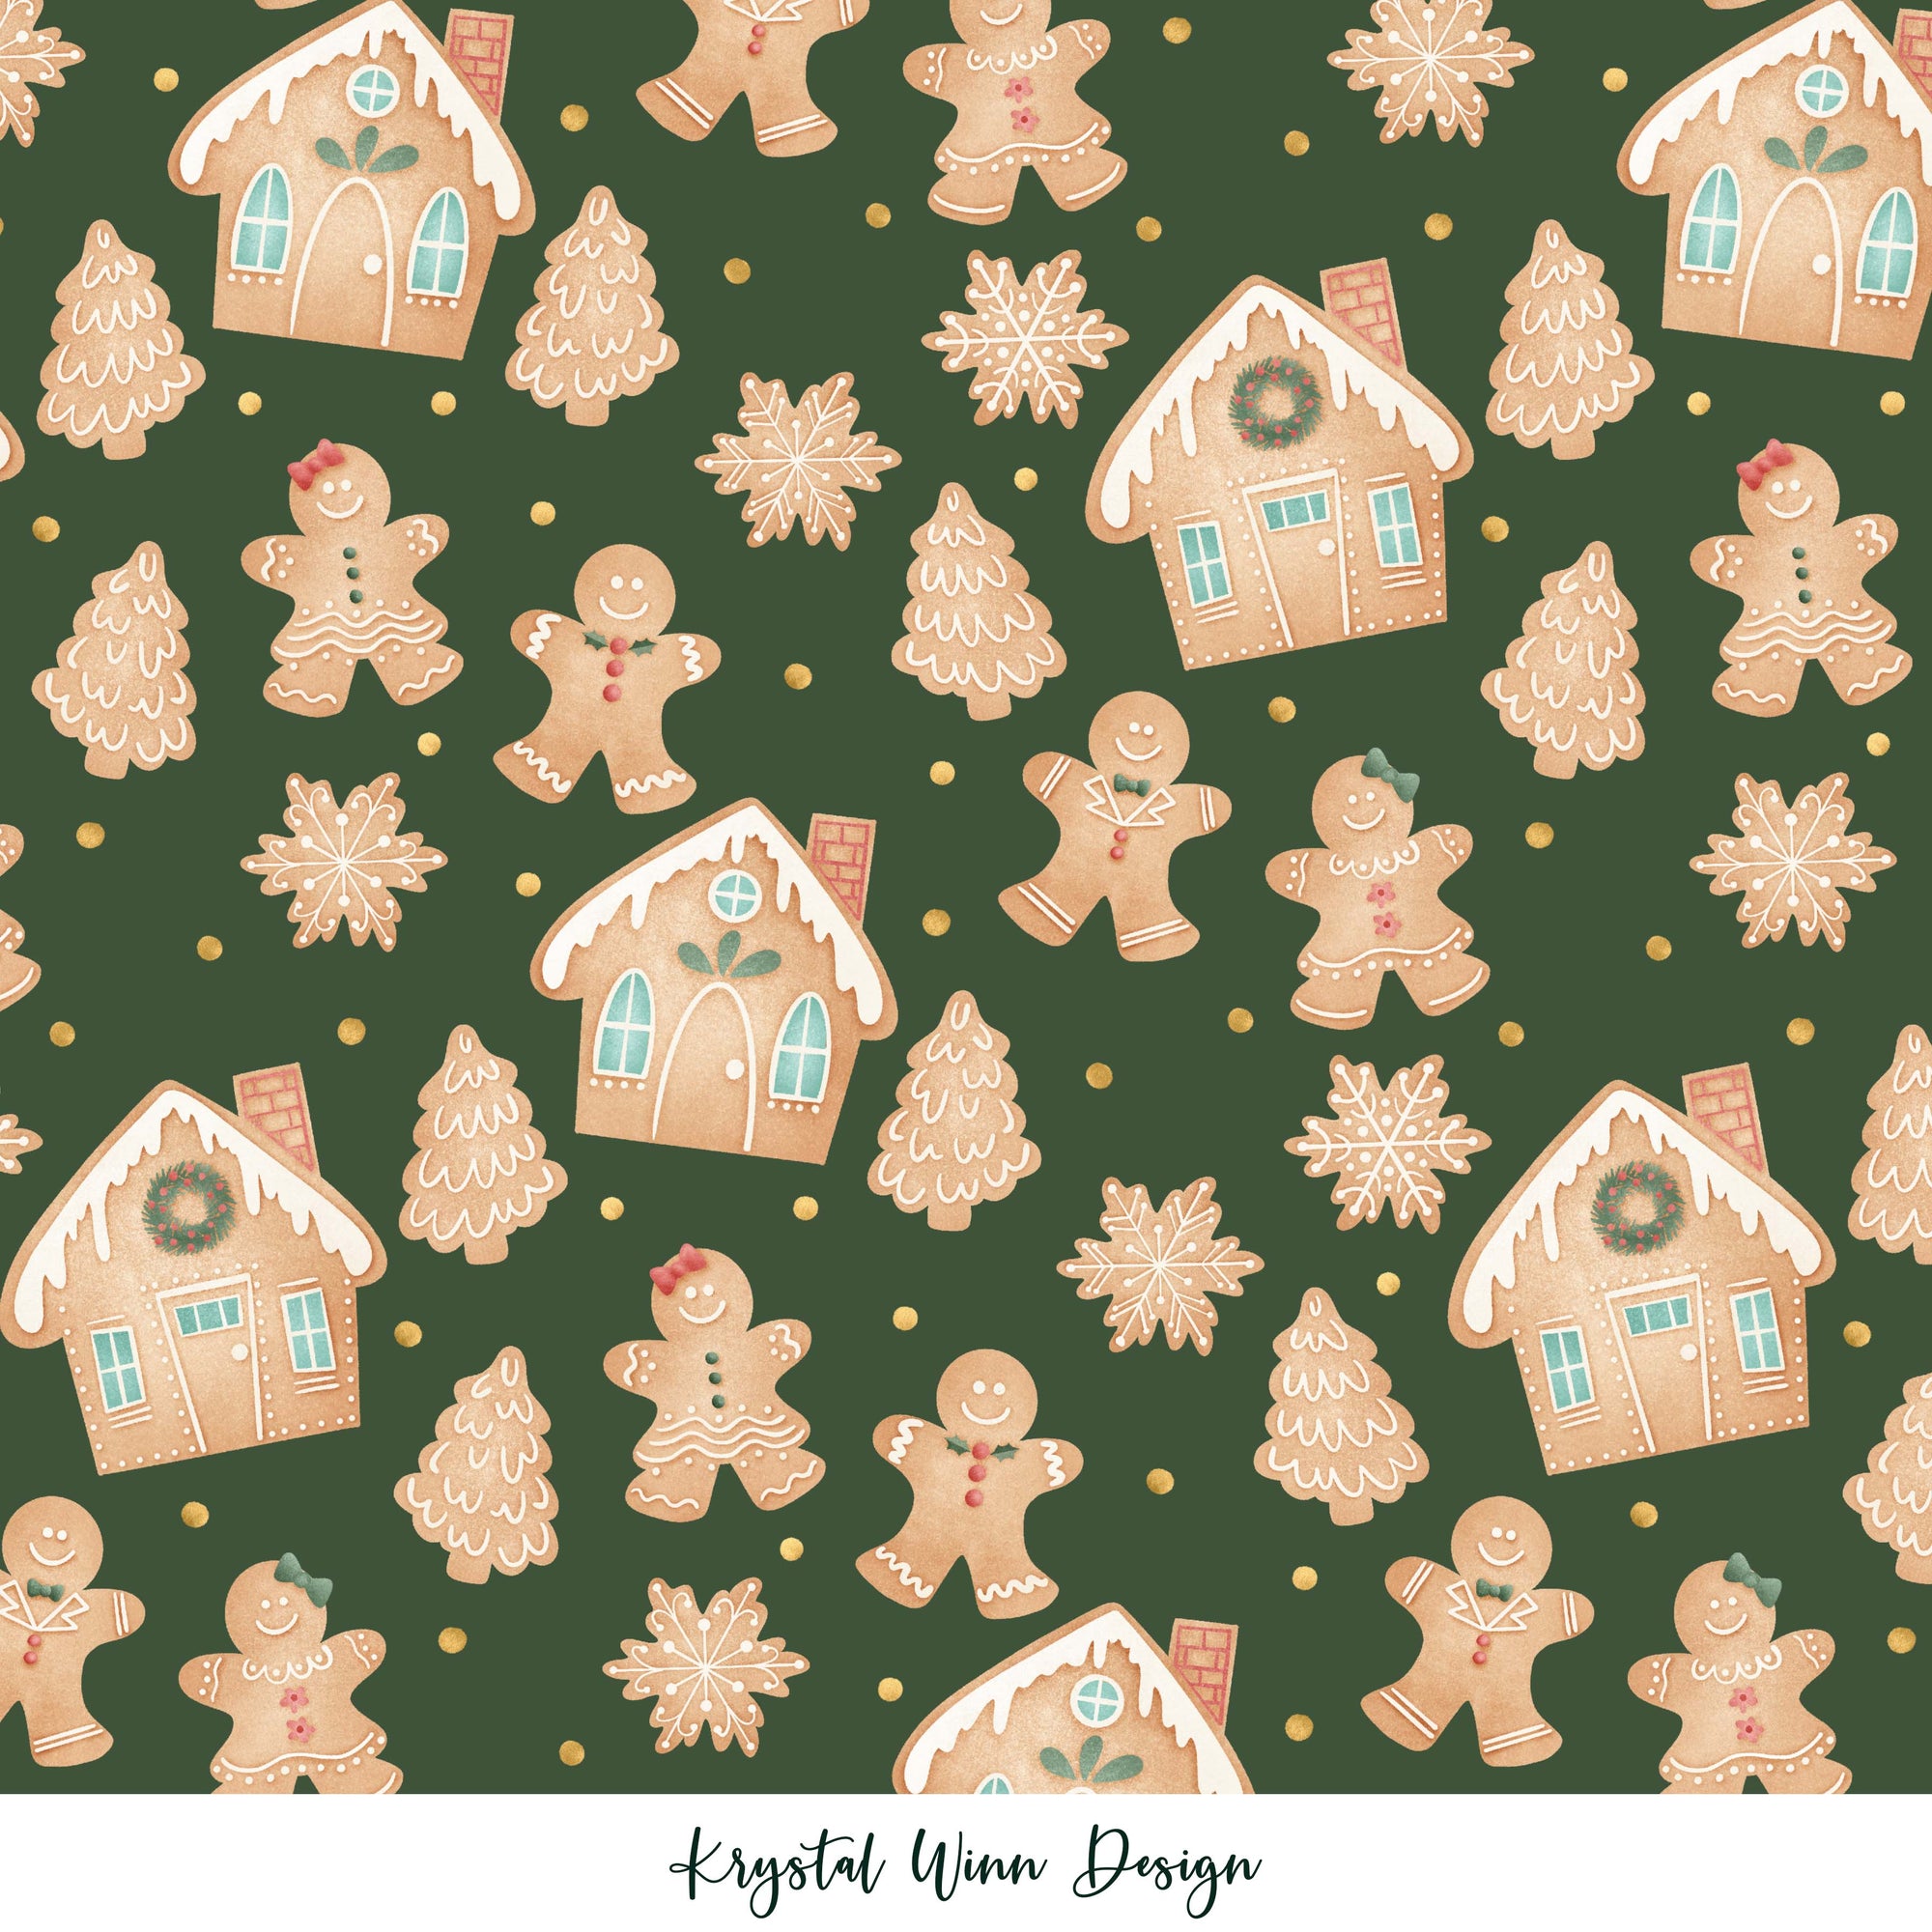 Gingerbread forest